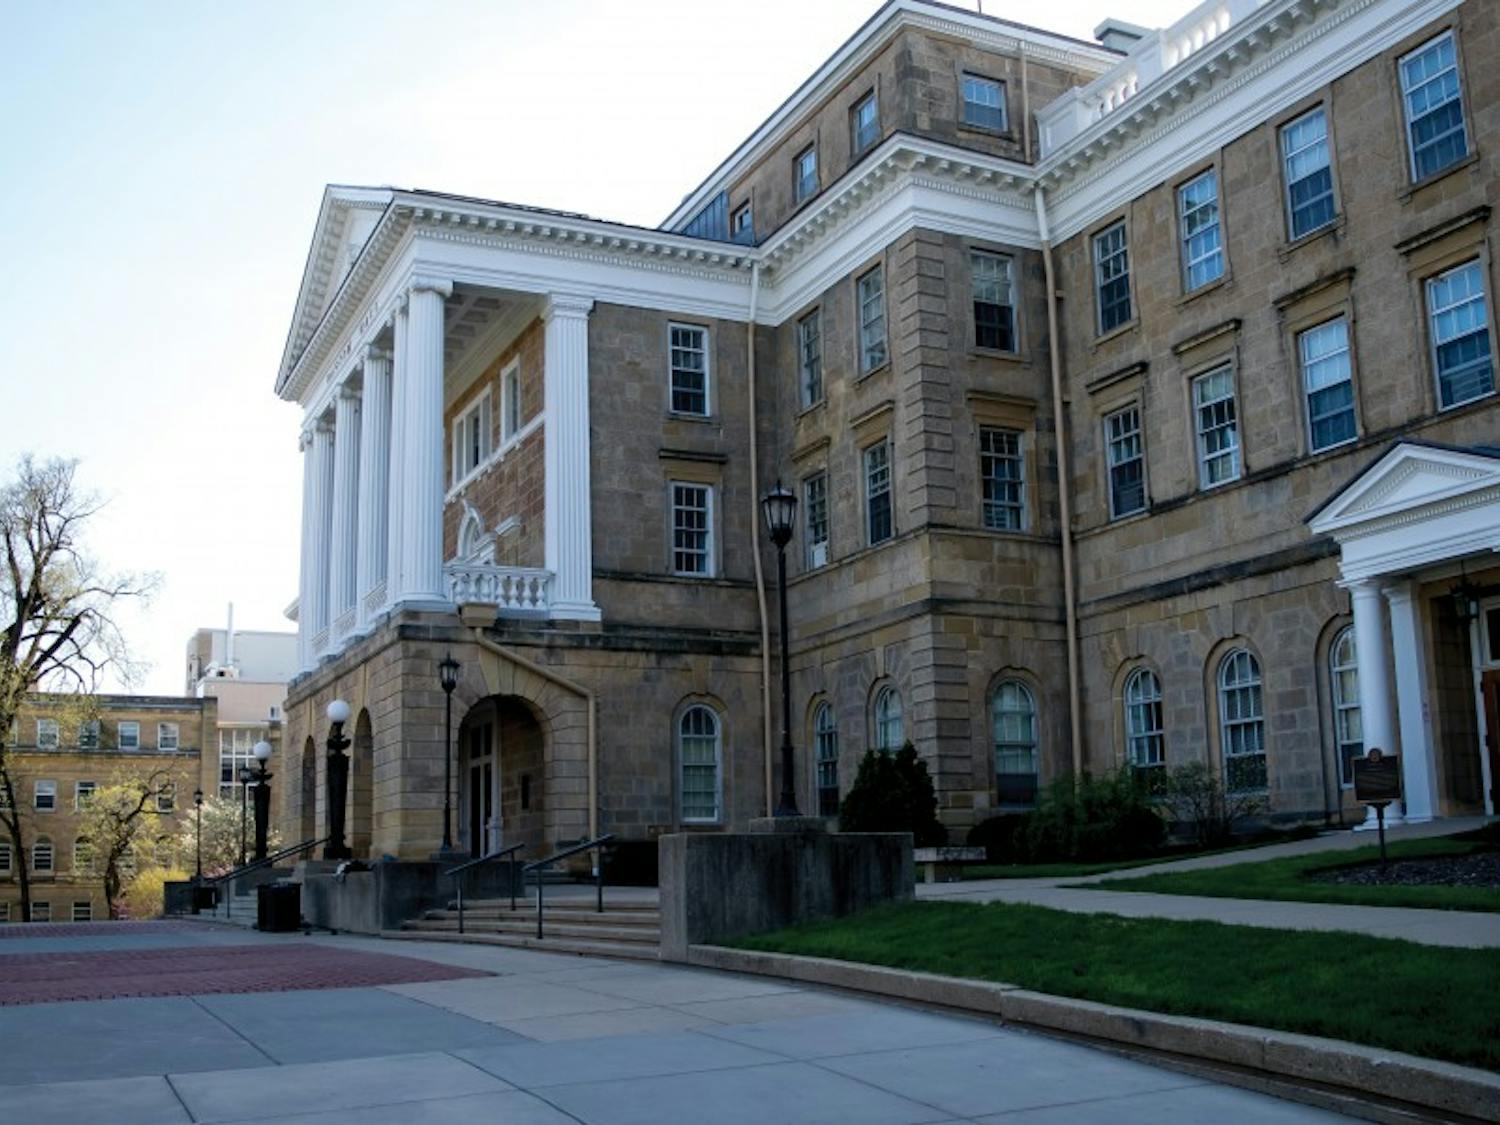 UW-Madison employees will be required to take an online sexual violence prevention education course as part of the university’s efforts to crack down on sexual assault and harassment on campus.